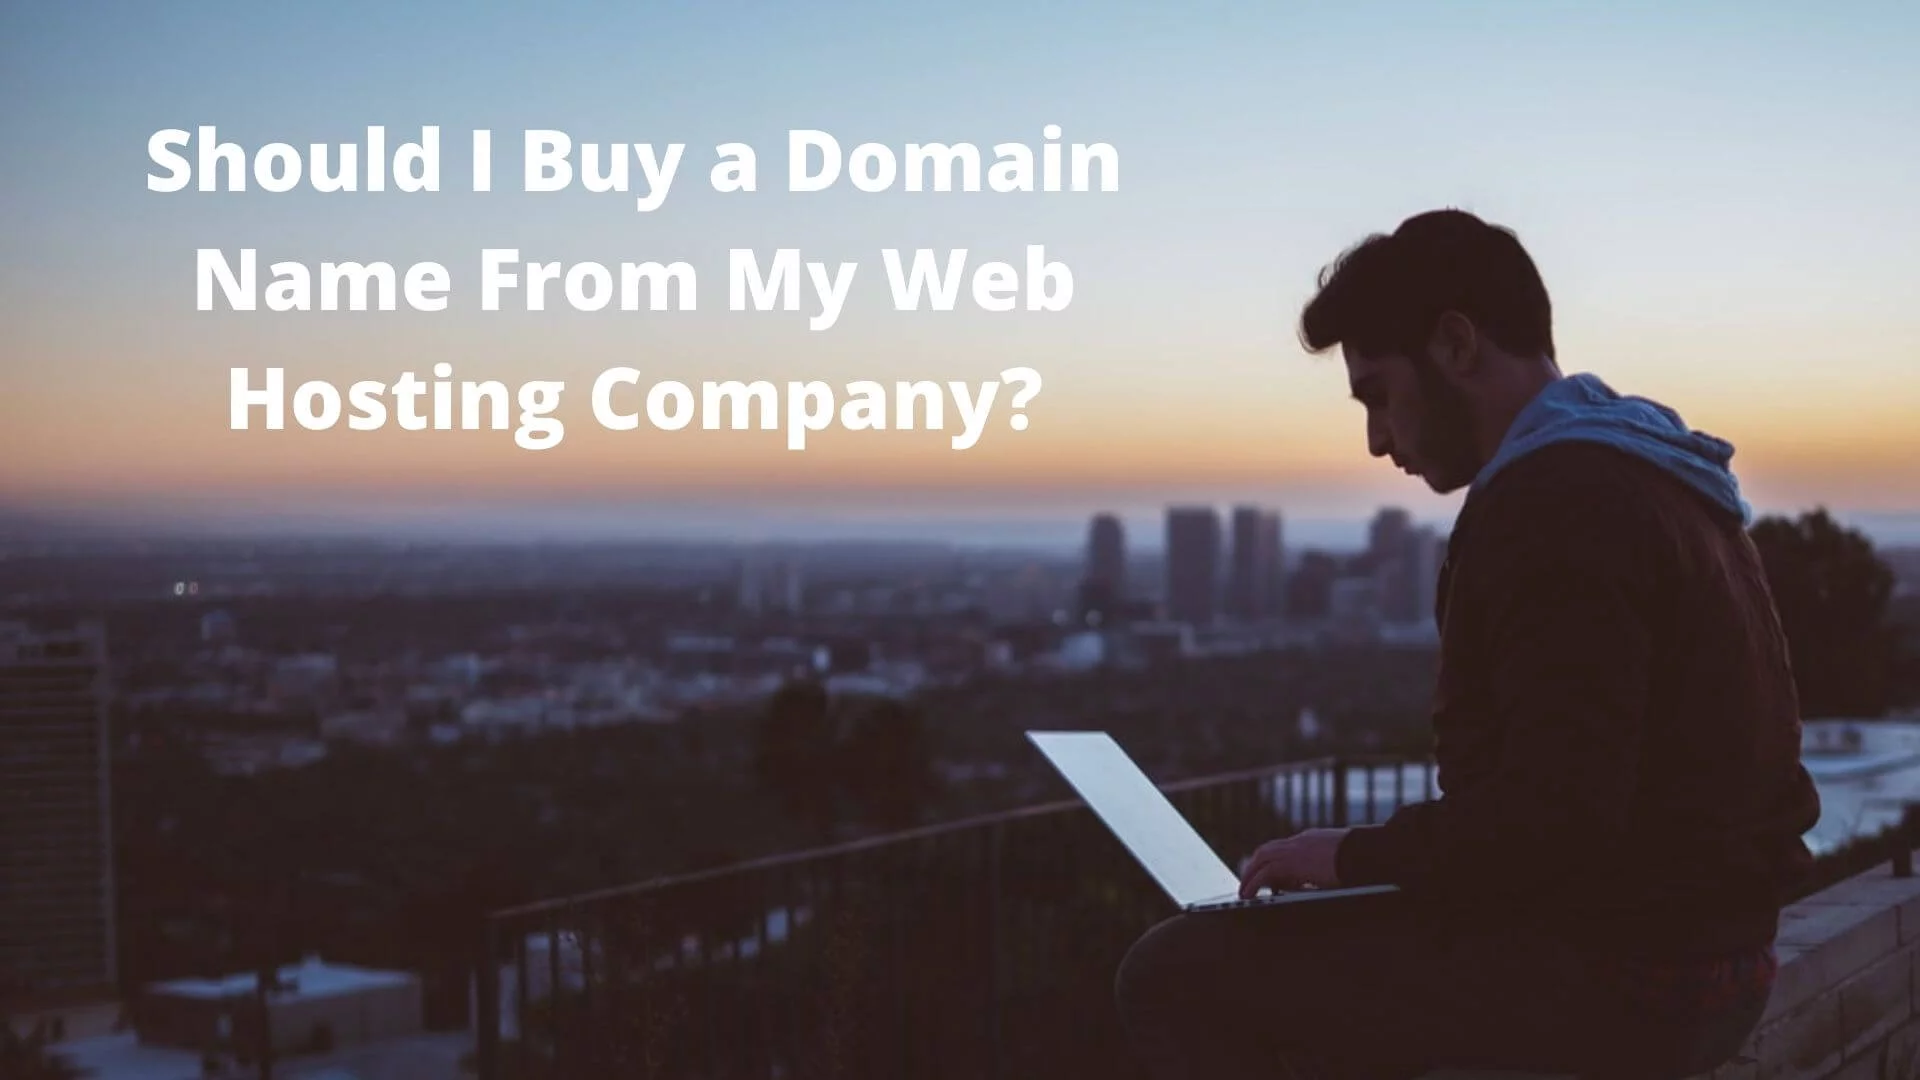 Should-I-Buy-a-Domain-Name-From-My-Web-Hosting-Company_-1